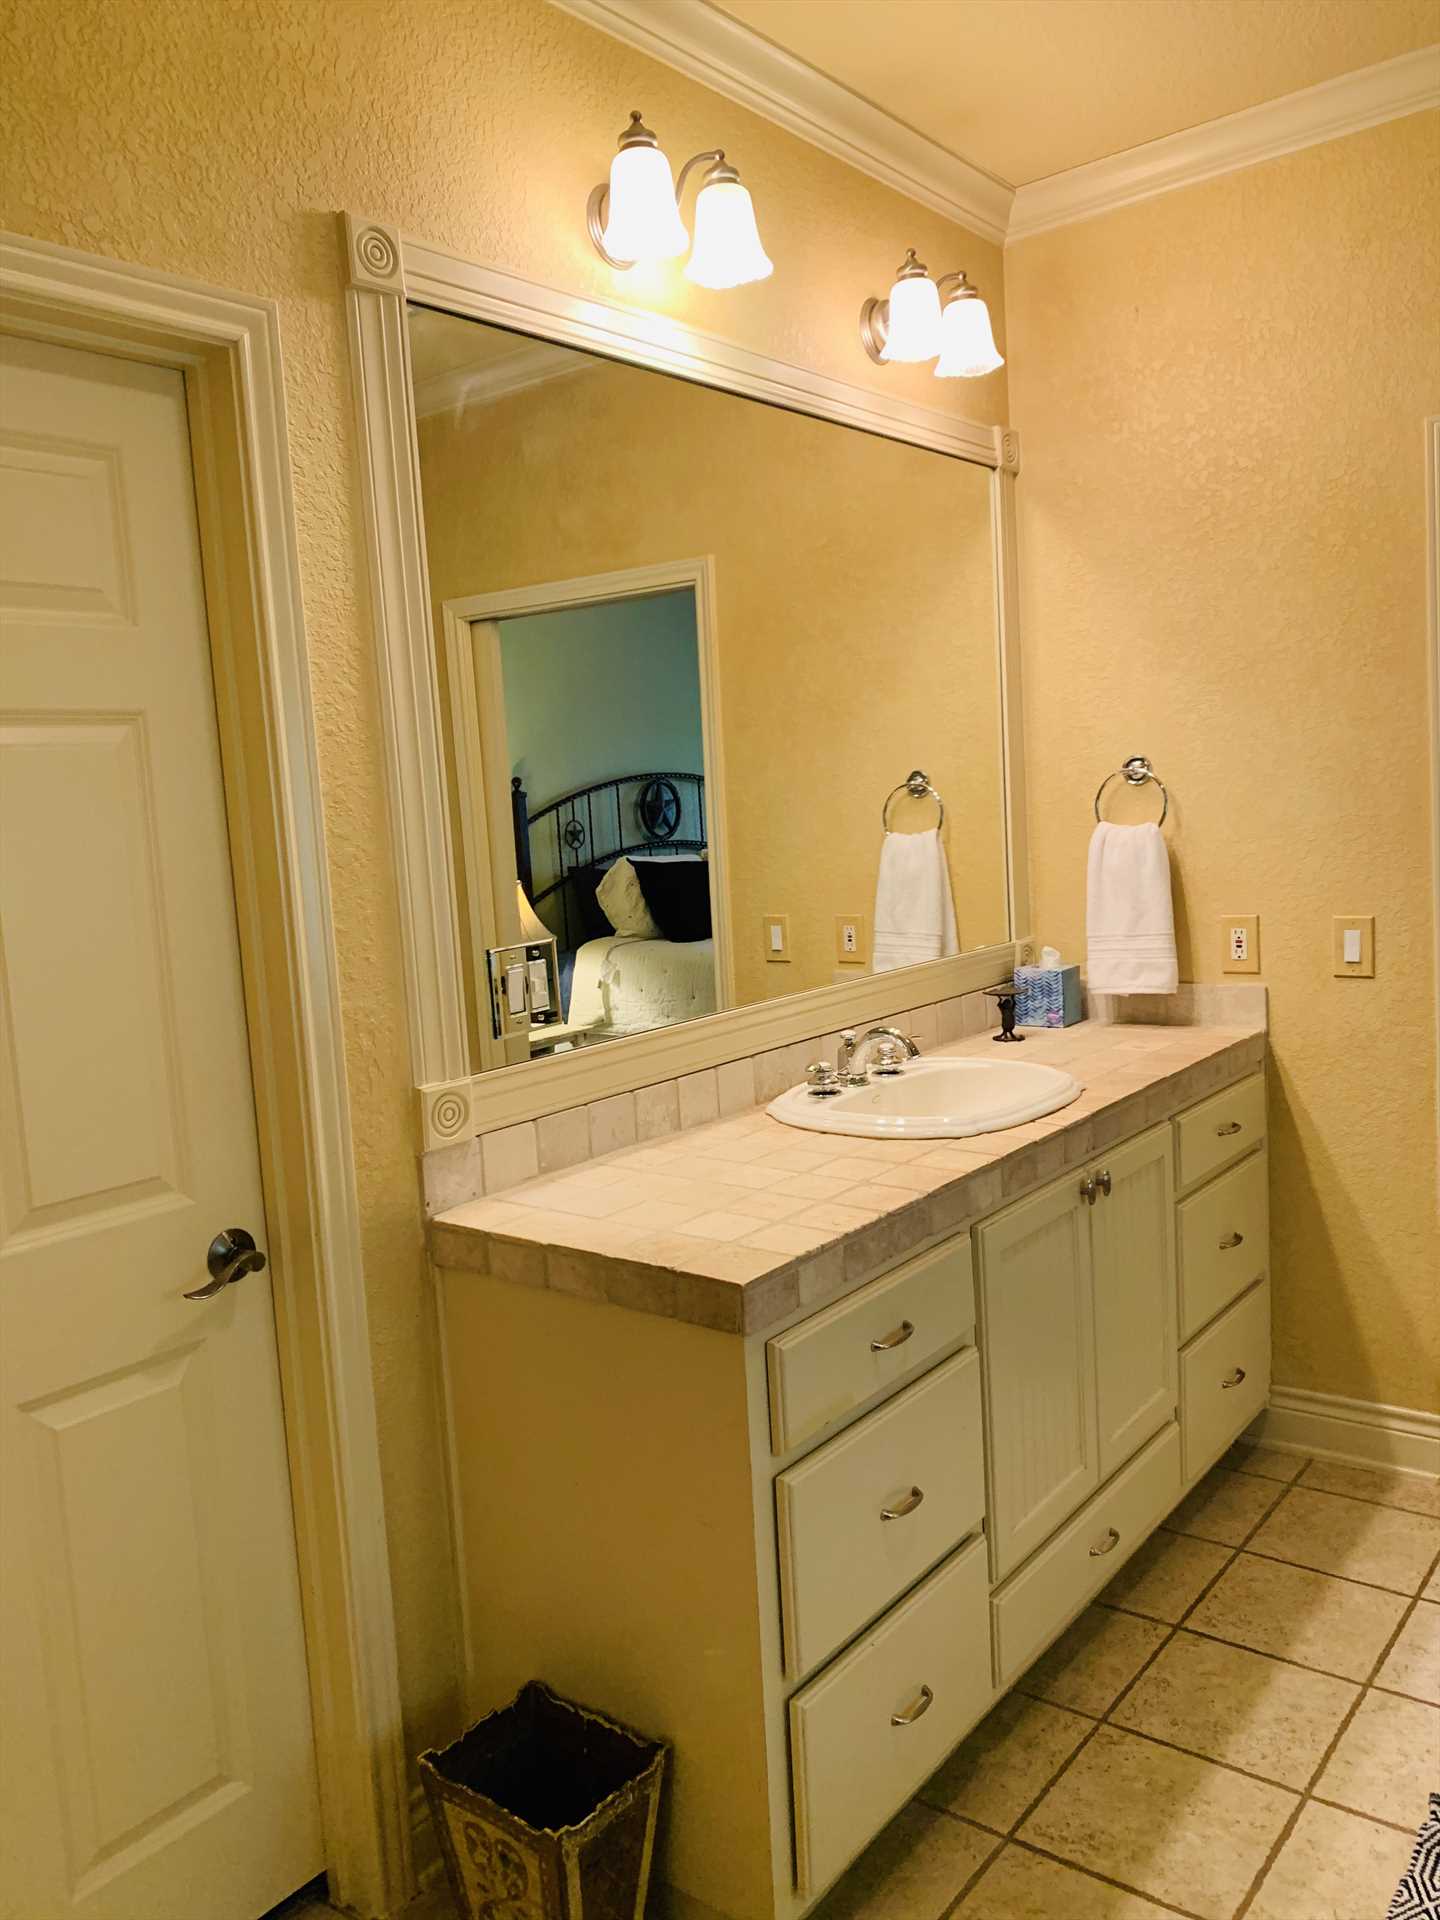                                                 The master bath also includes a big vanity with plenty of counter space, a walk-in closet, and all bathrooms and bedrooms include plenty of soft and fluffy linens.